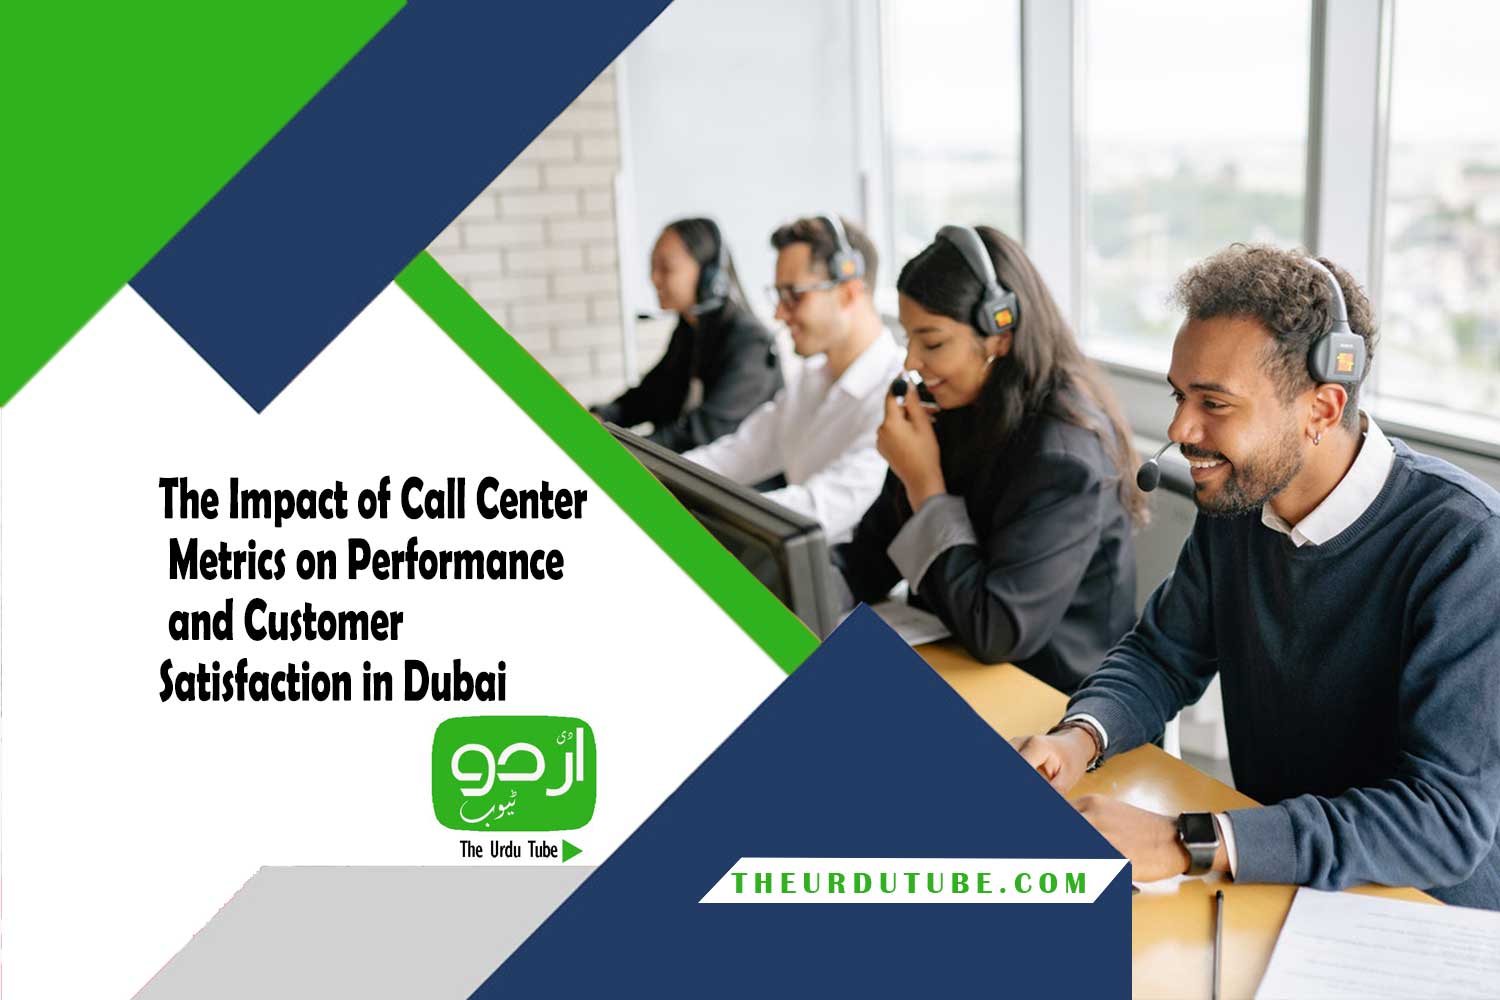 The Impact of Call Center Metrics on Performance and Customer Satisfaction in Dubai